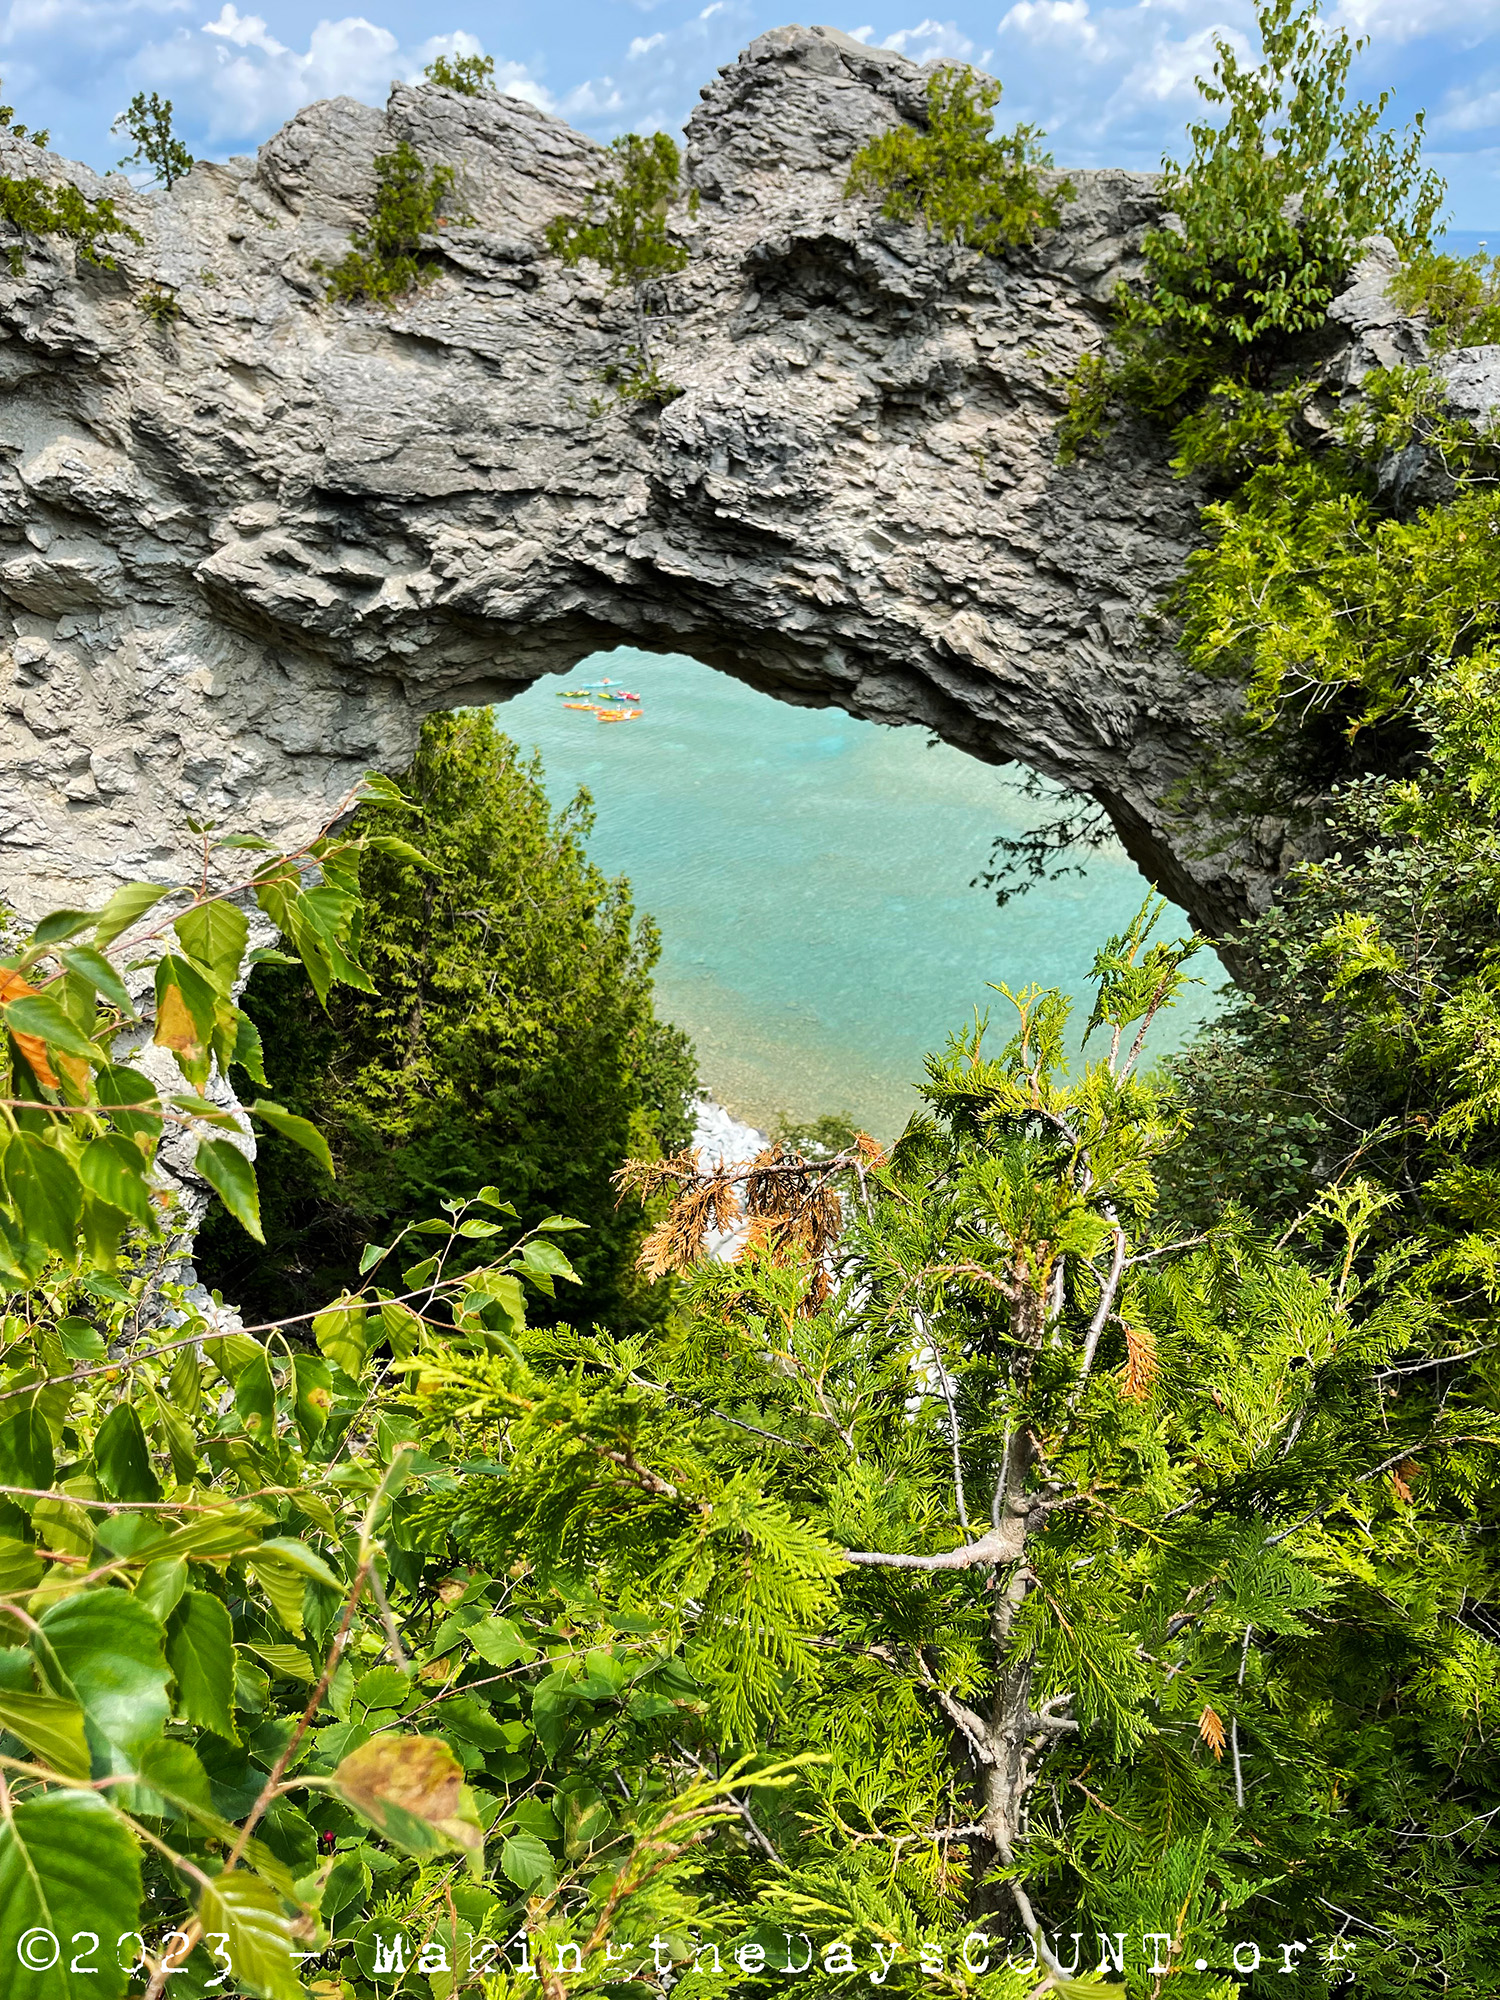 Arch Rock, created slowly over time